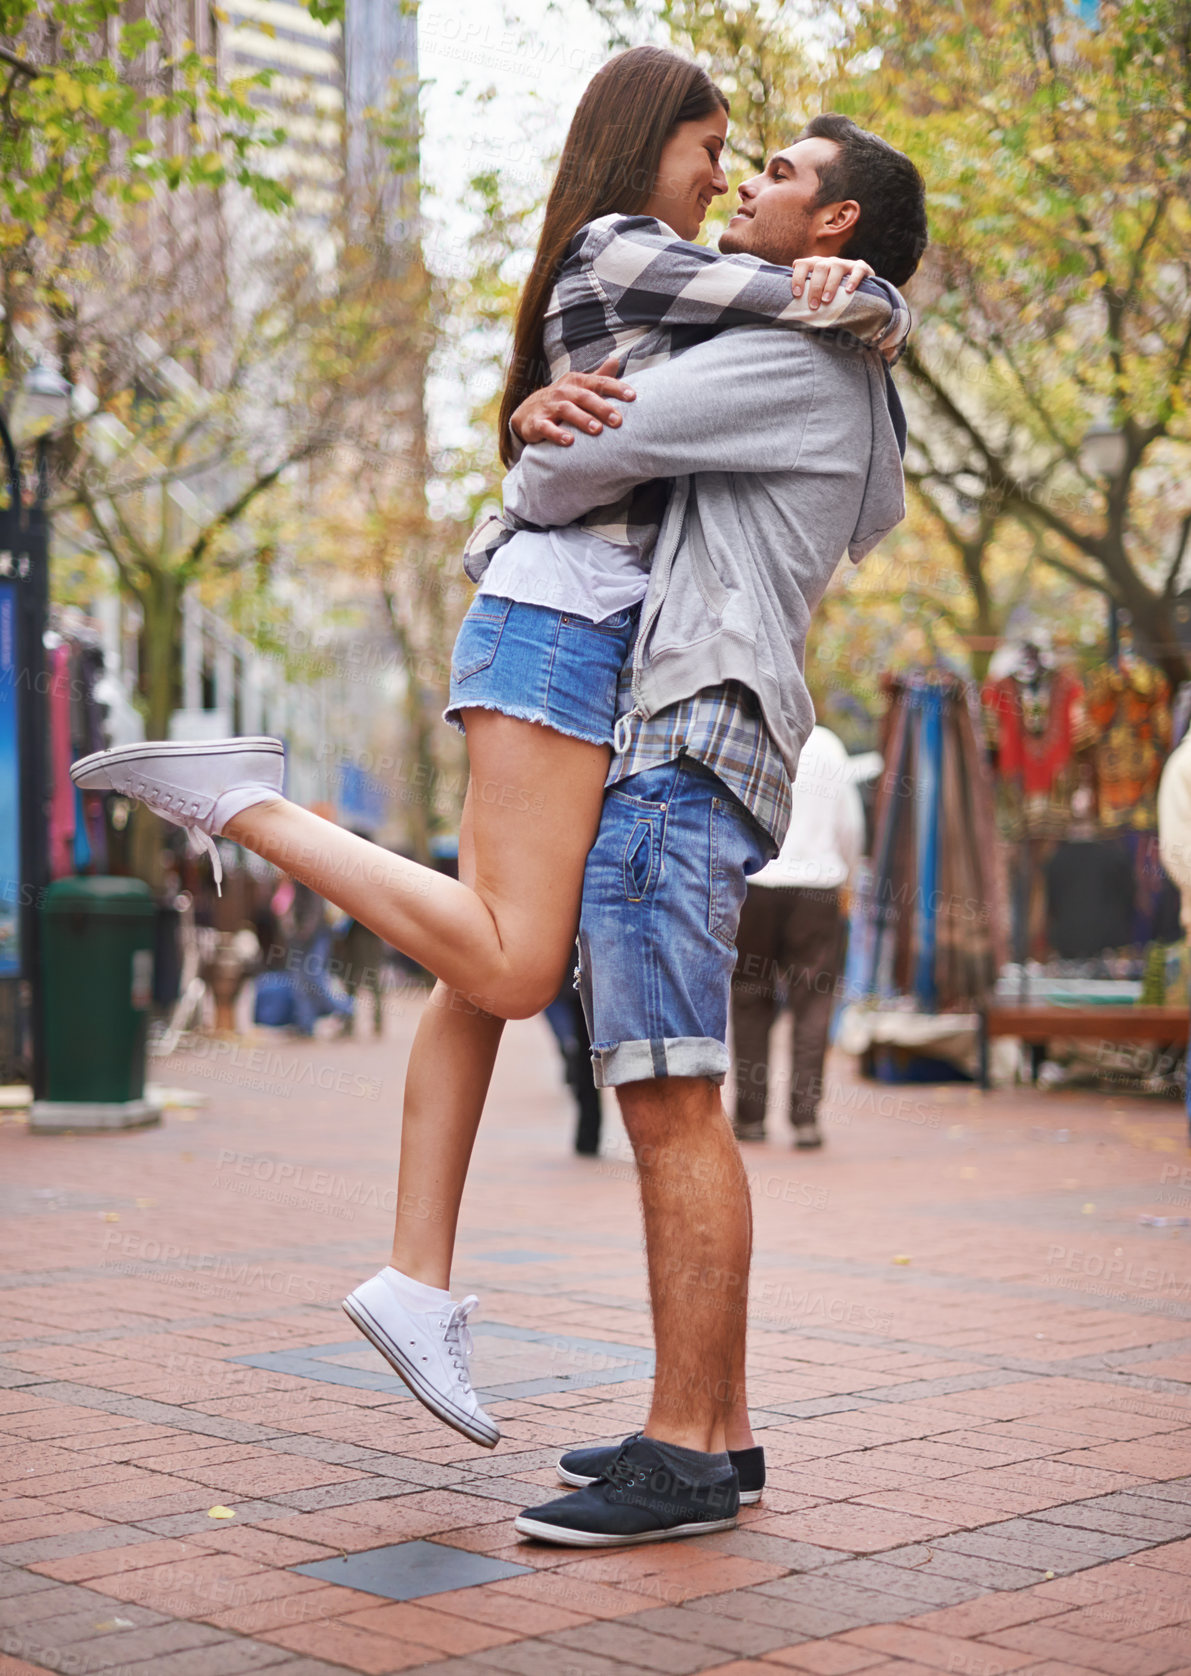 Buy stock photo Couple, hug and outdoor in city, happy and excited with love, bonding together and romantic relationship. Cape town, embrace and enjoy with boyfriend and girlfriend in street, summer and dating